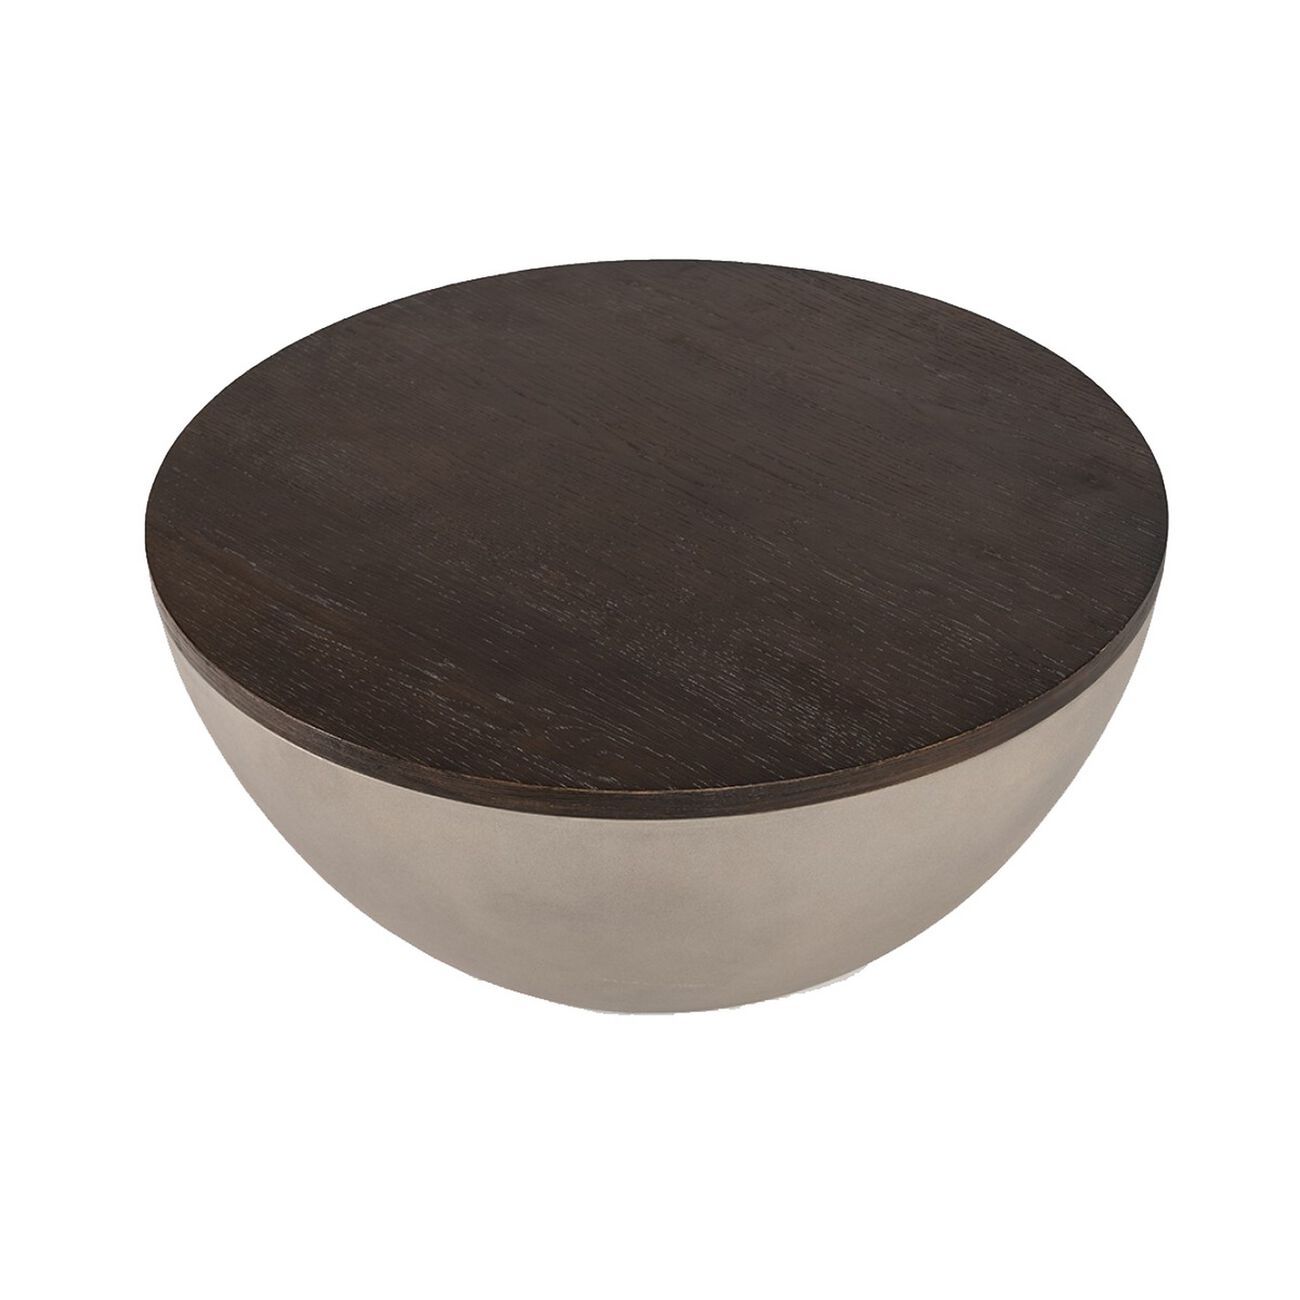 Round Metal Body Coffee Table with Wooden Tabletop, Gray and Brown